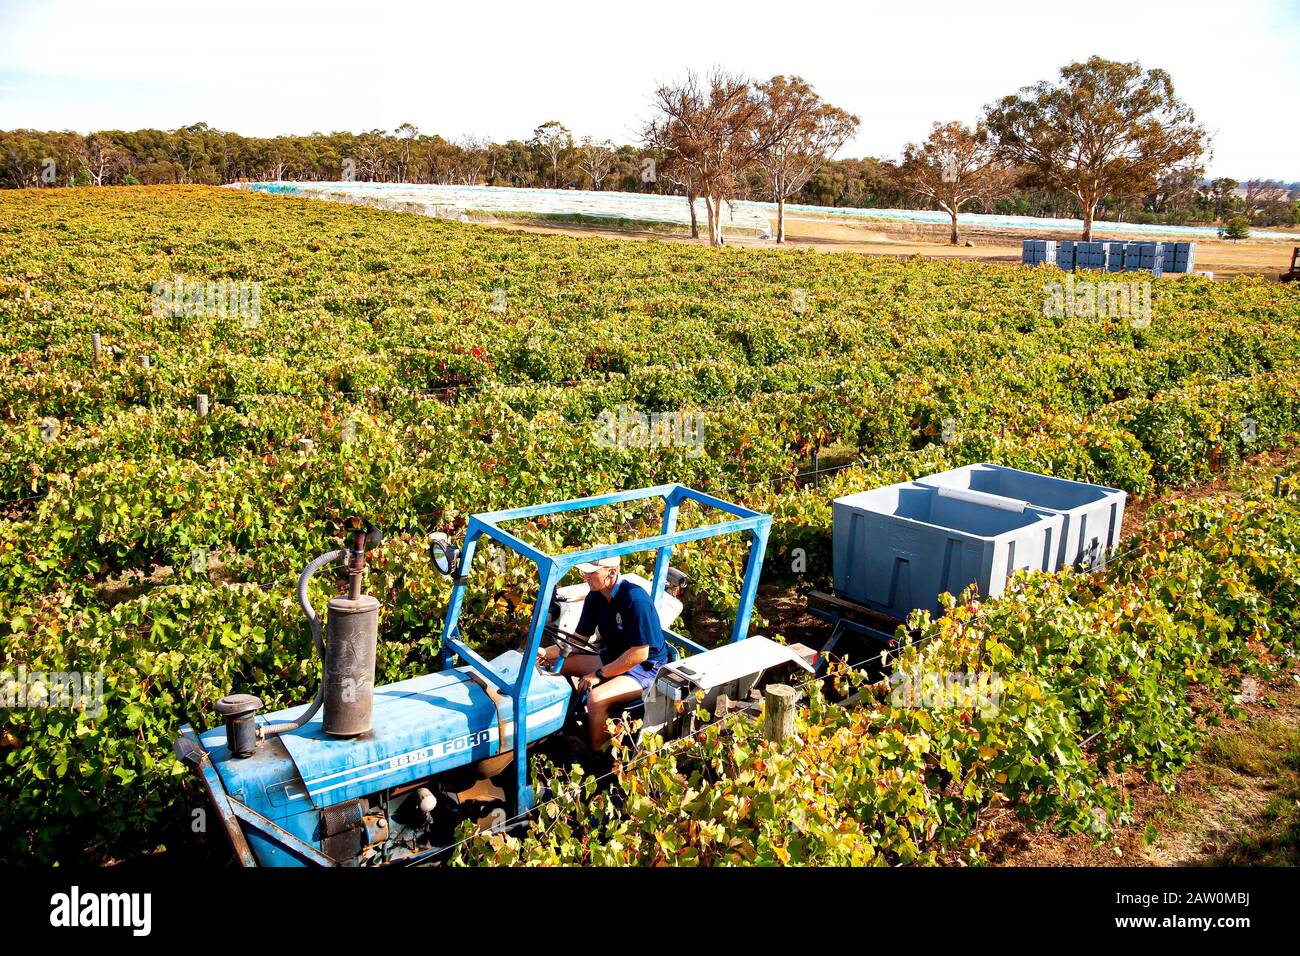 Australian wine makers and breweries Production in South/Western Australia and New South Wales wine regions.Tractor towing collection bins for grapes Stock Photo